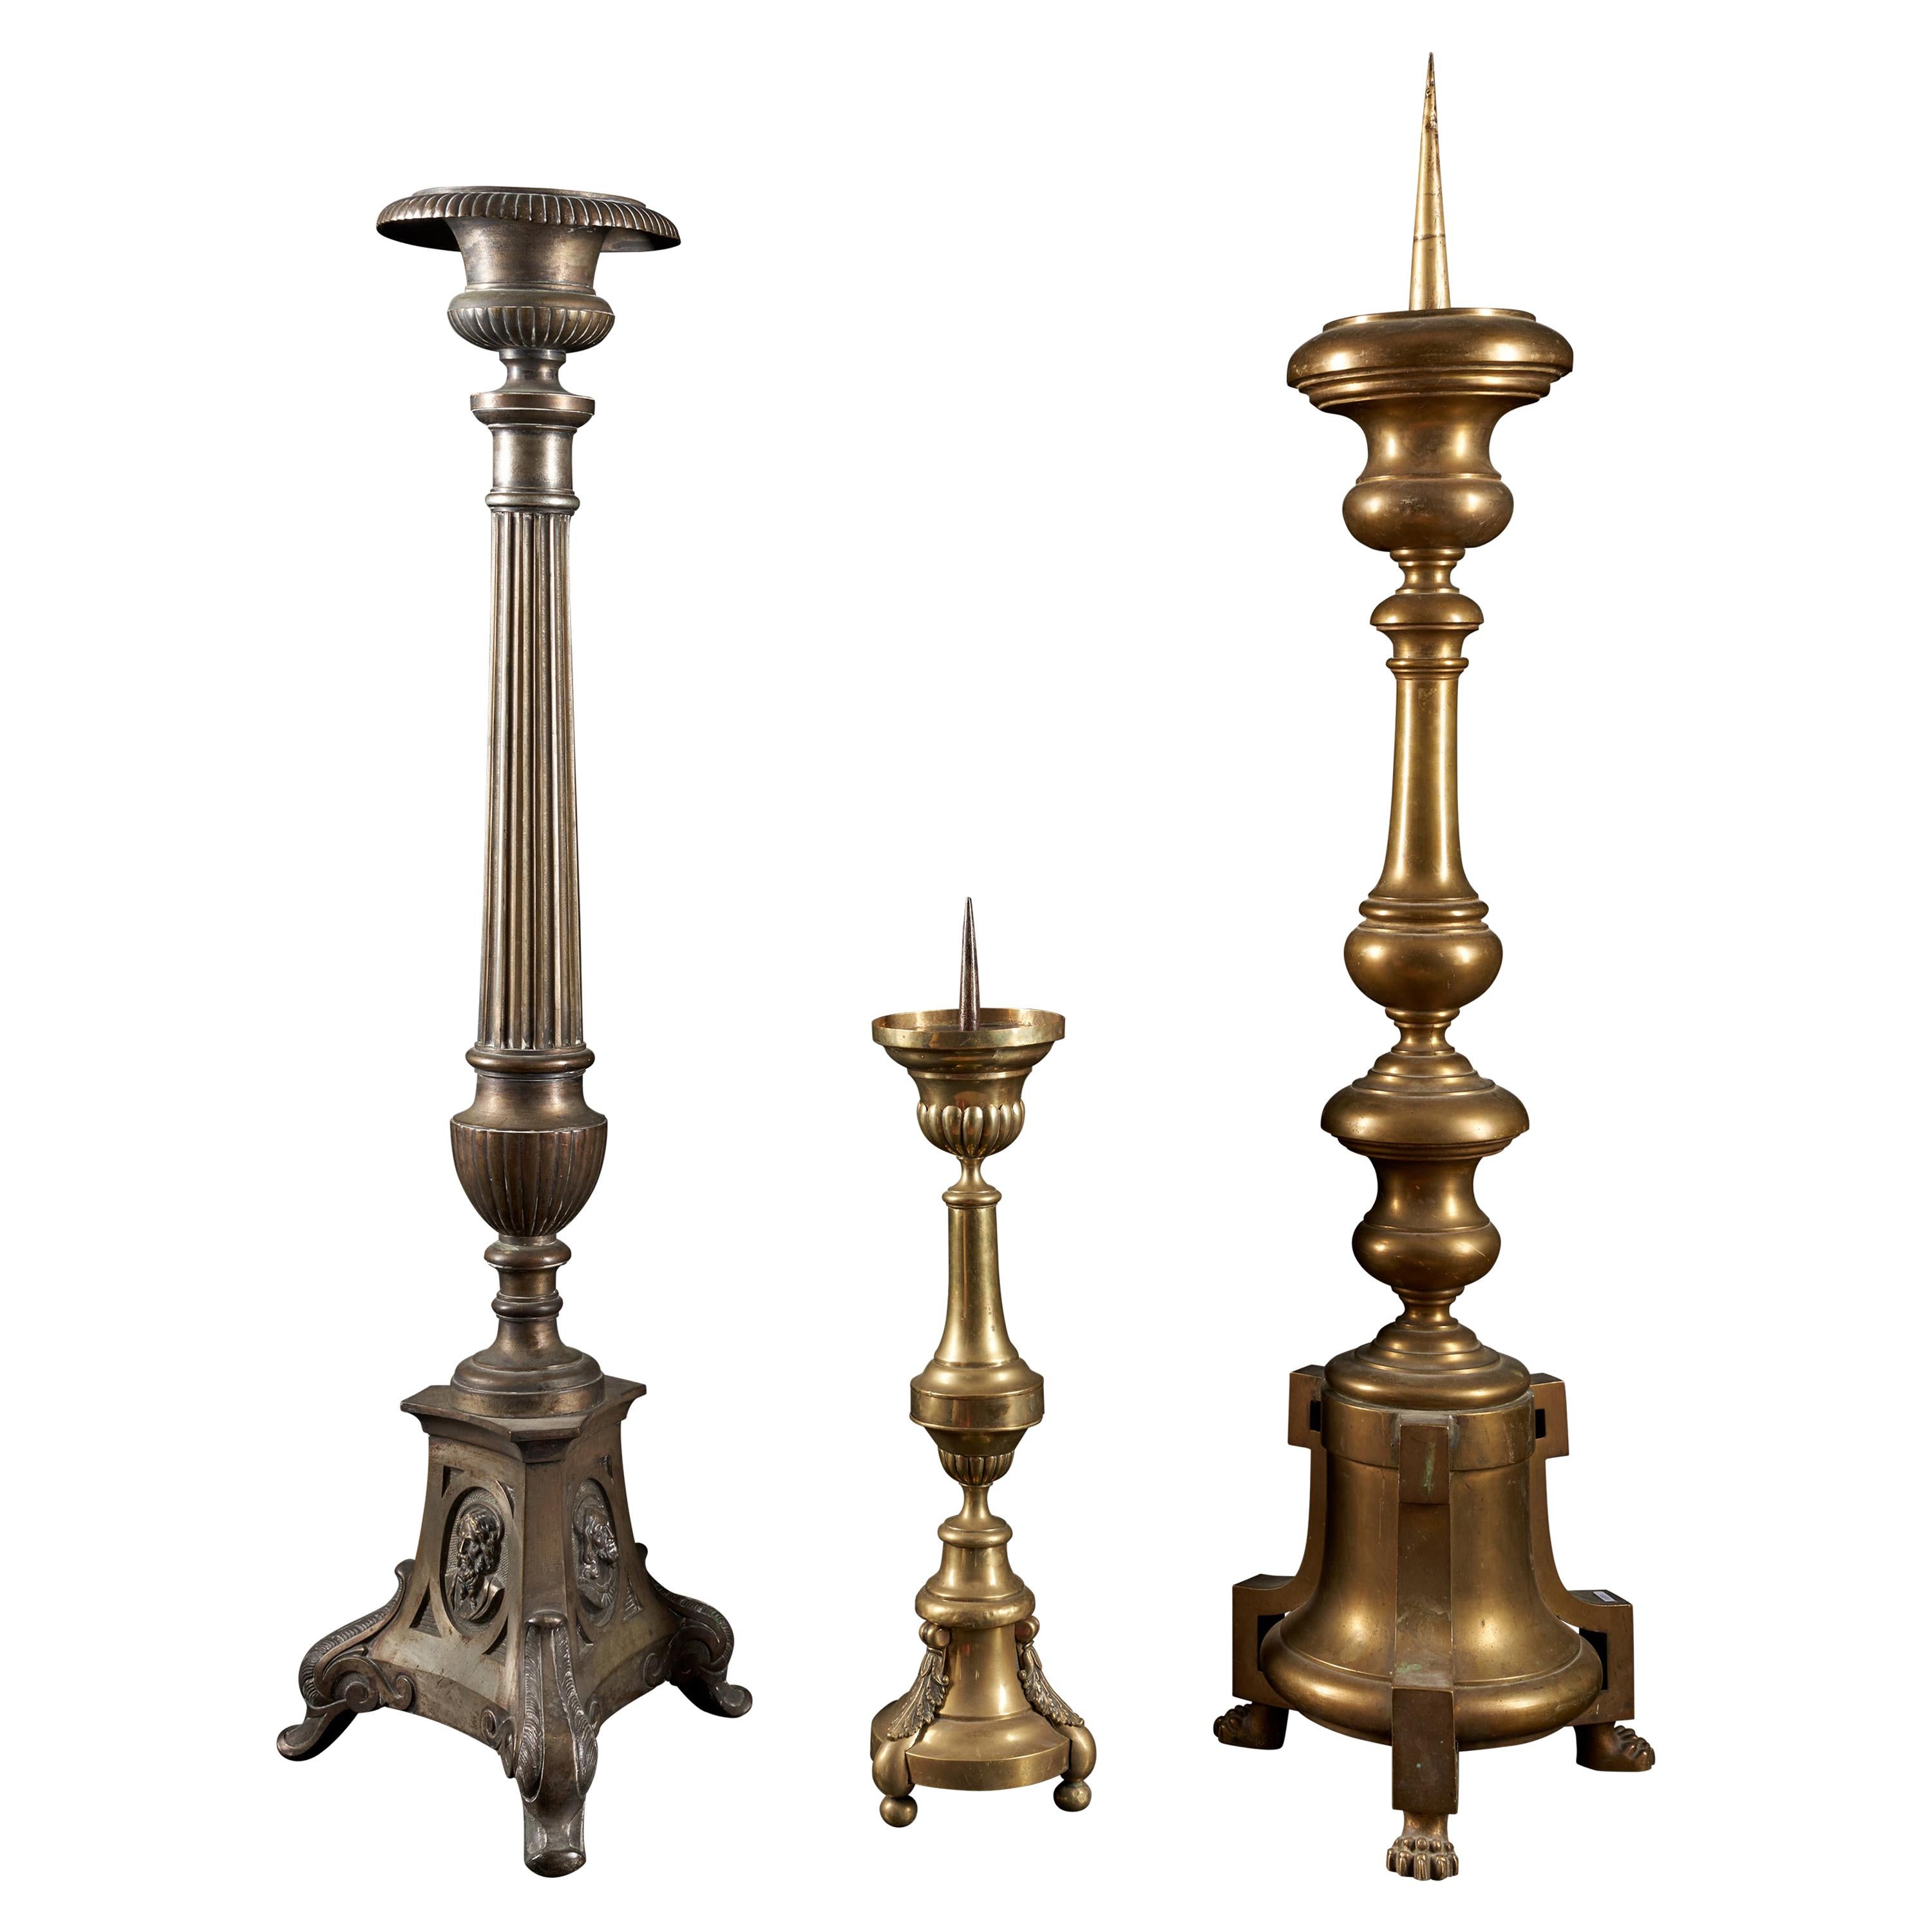 Selection of Three Brass Classic Candleholders